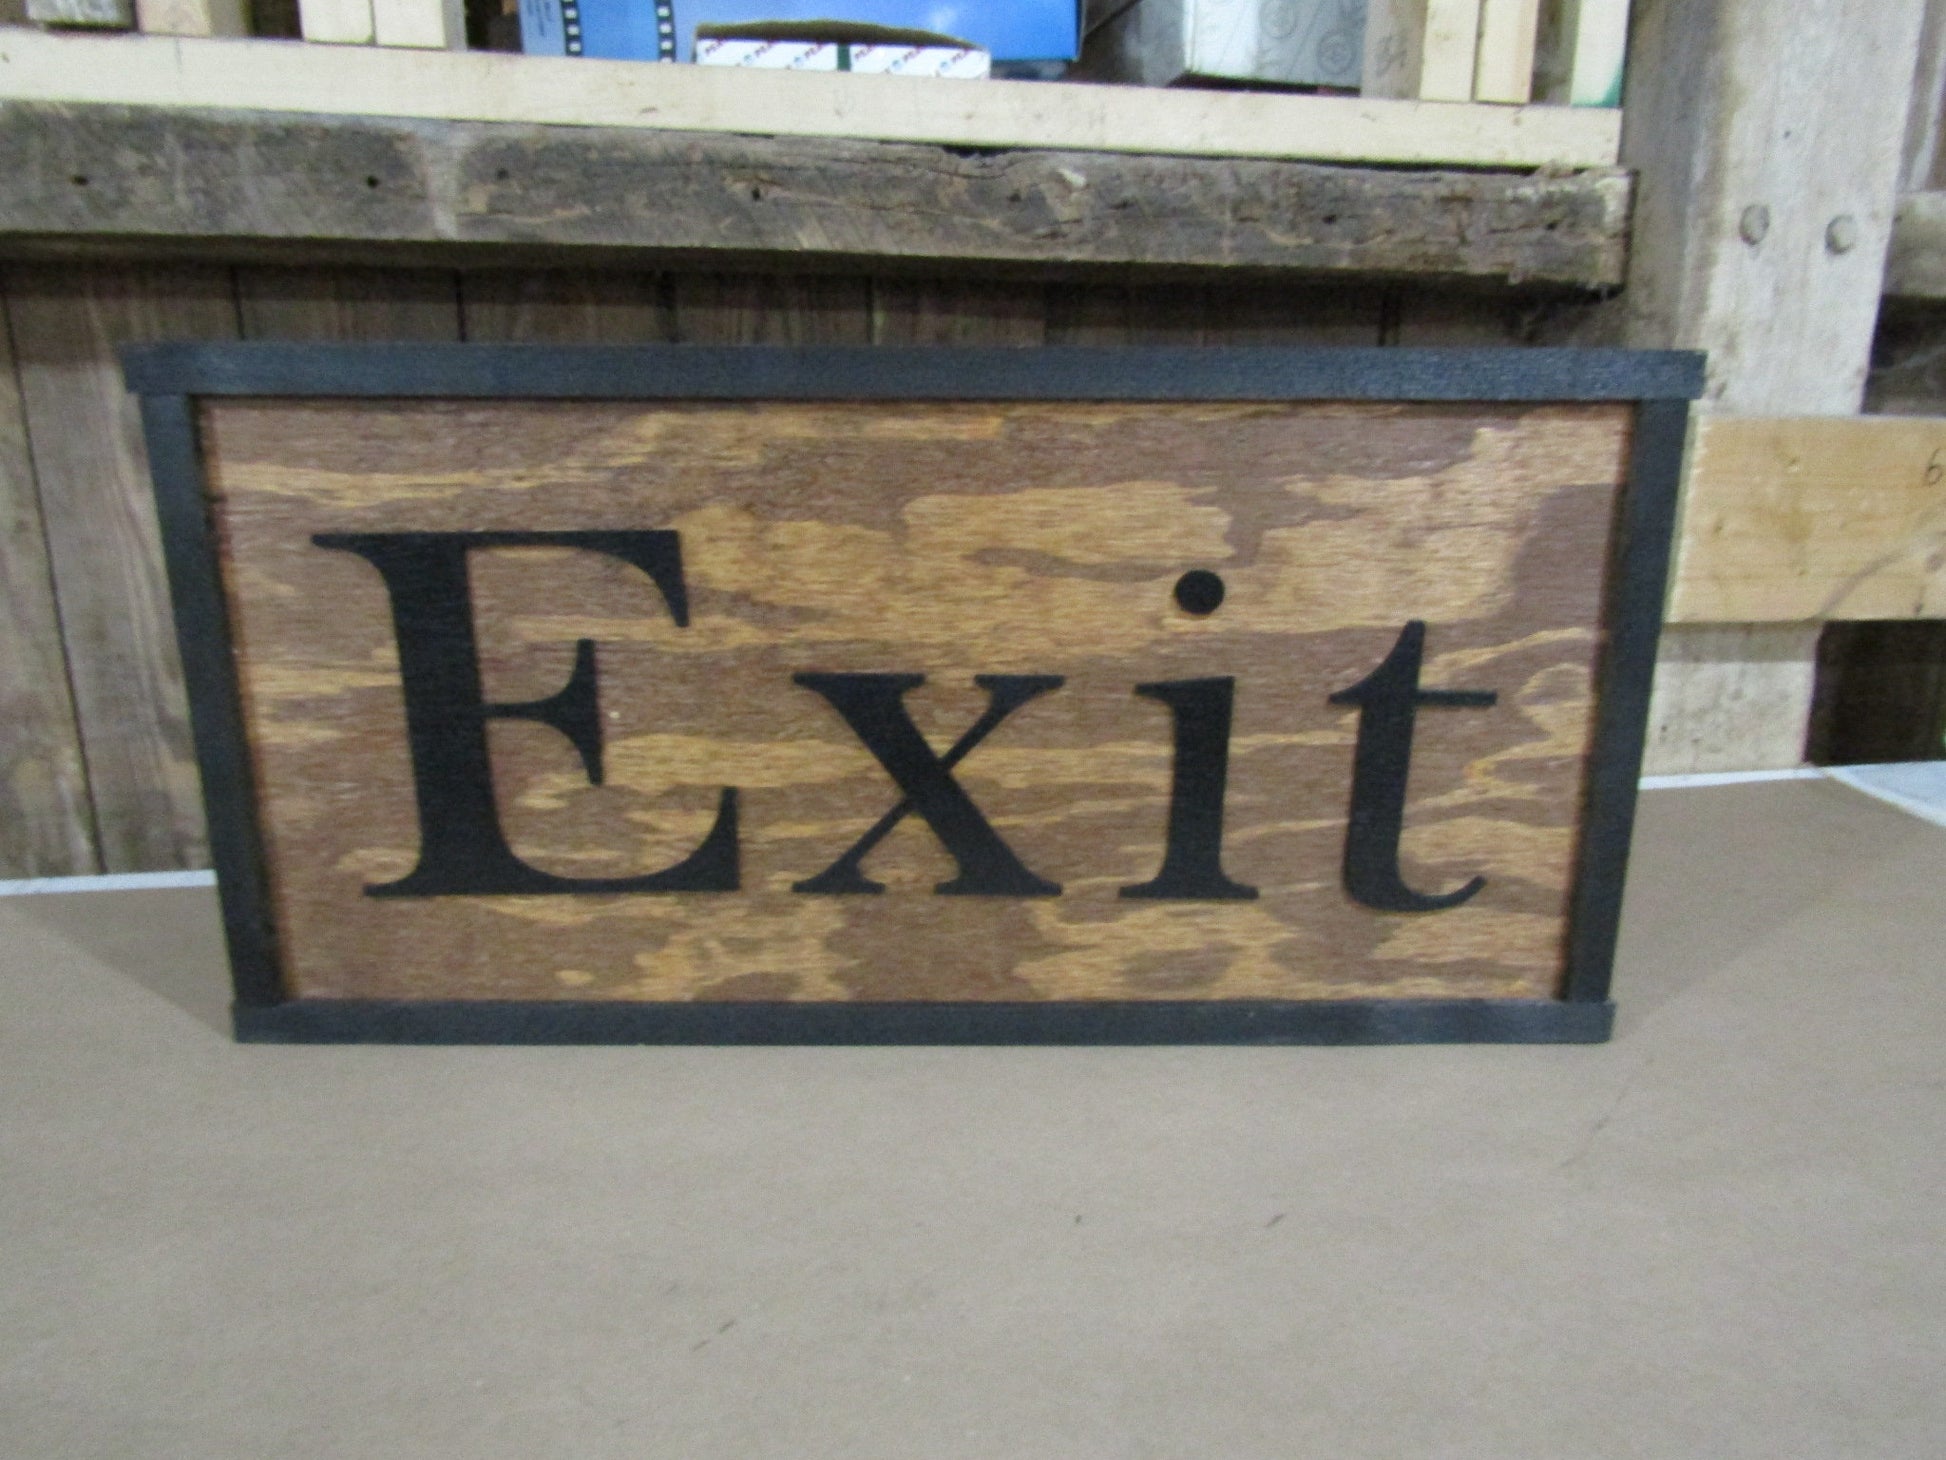 Exit Sign Directional Ranch Sign Company Name Address Signage Commerical Oversized Rustic Business Wood Laser Cut Out 3D Handmade